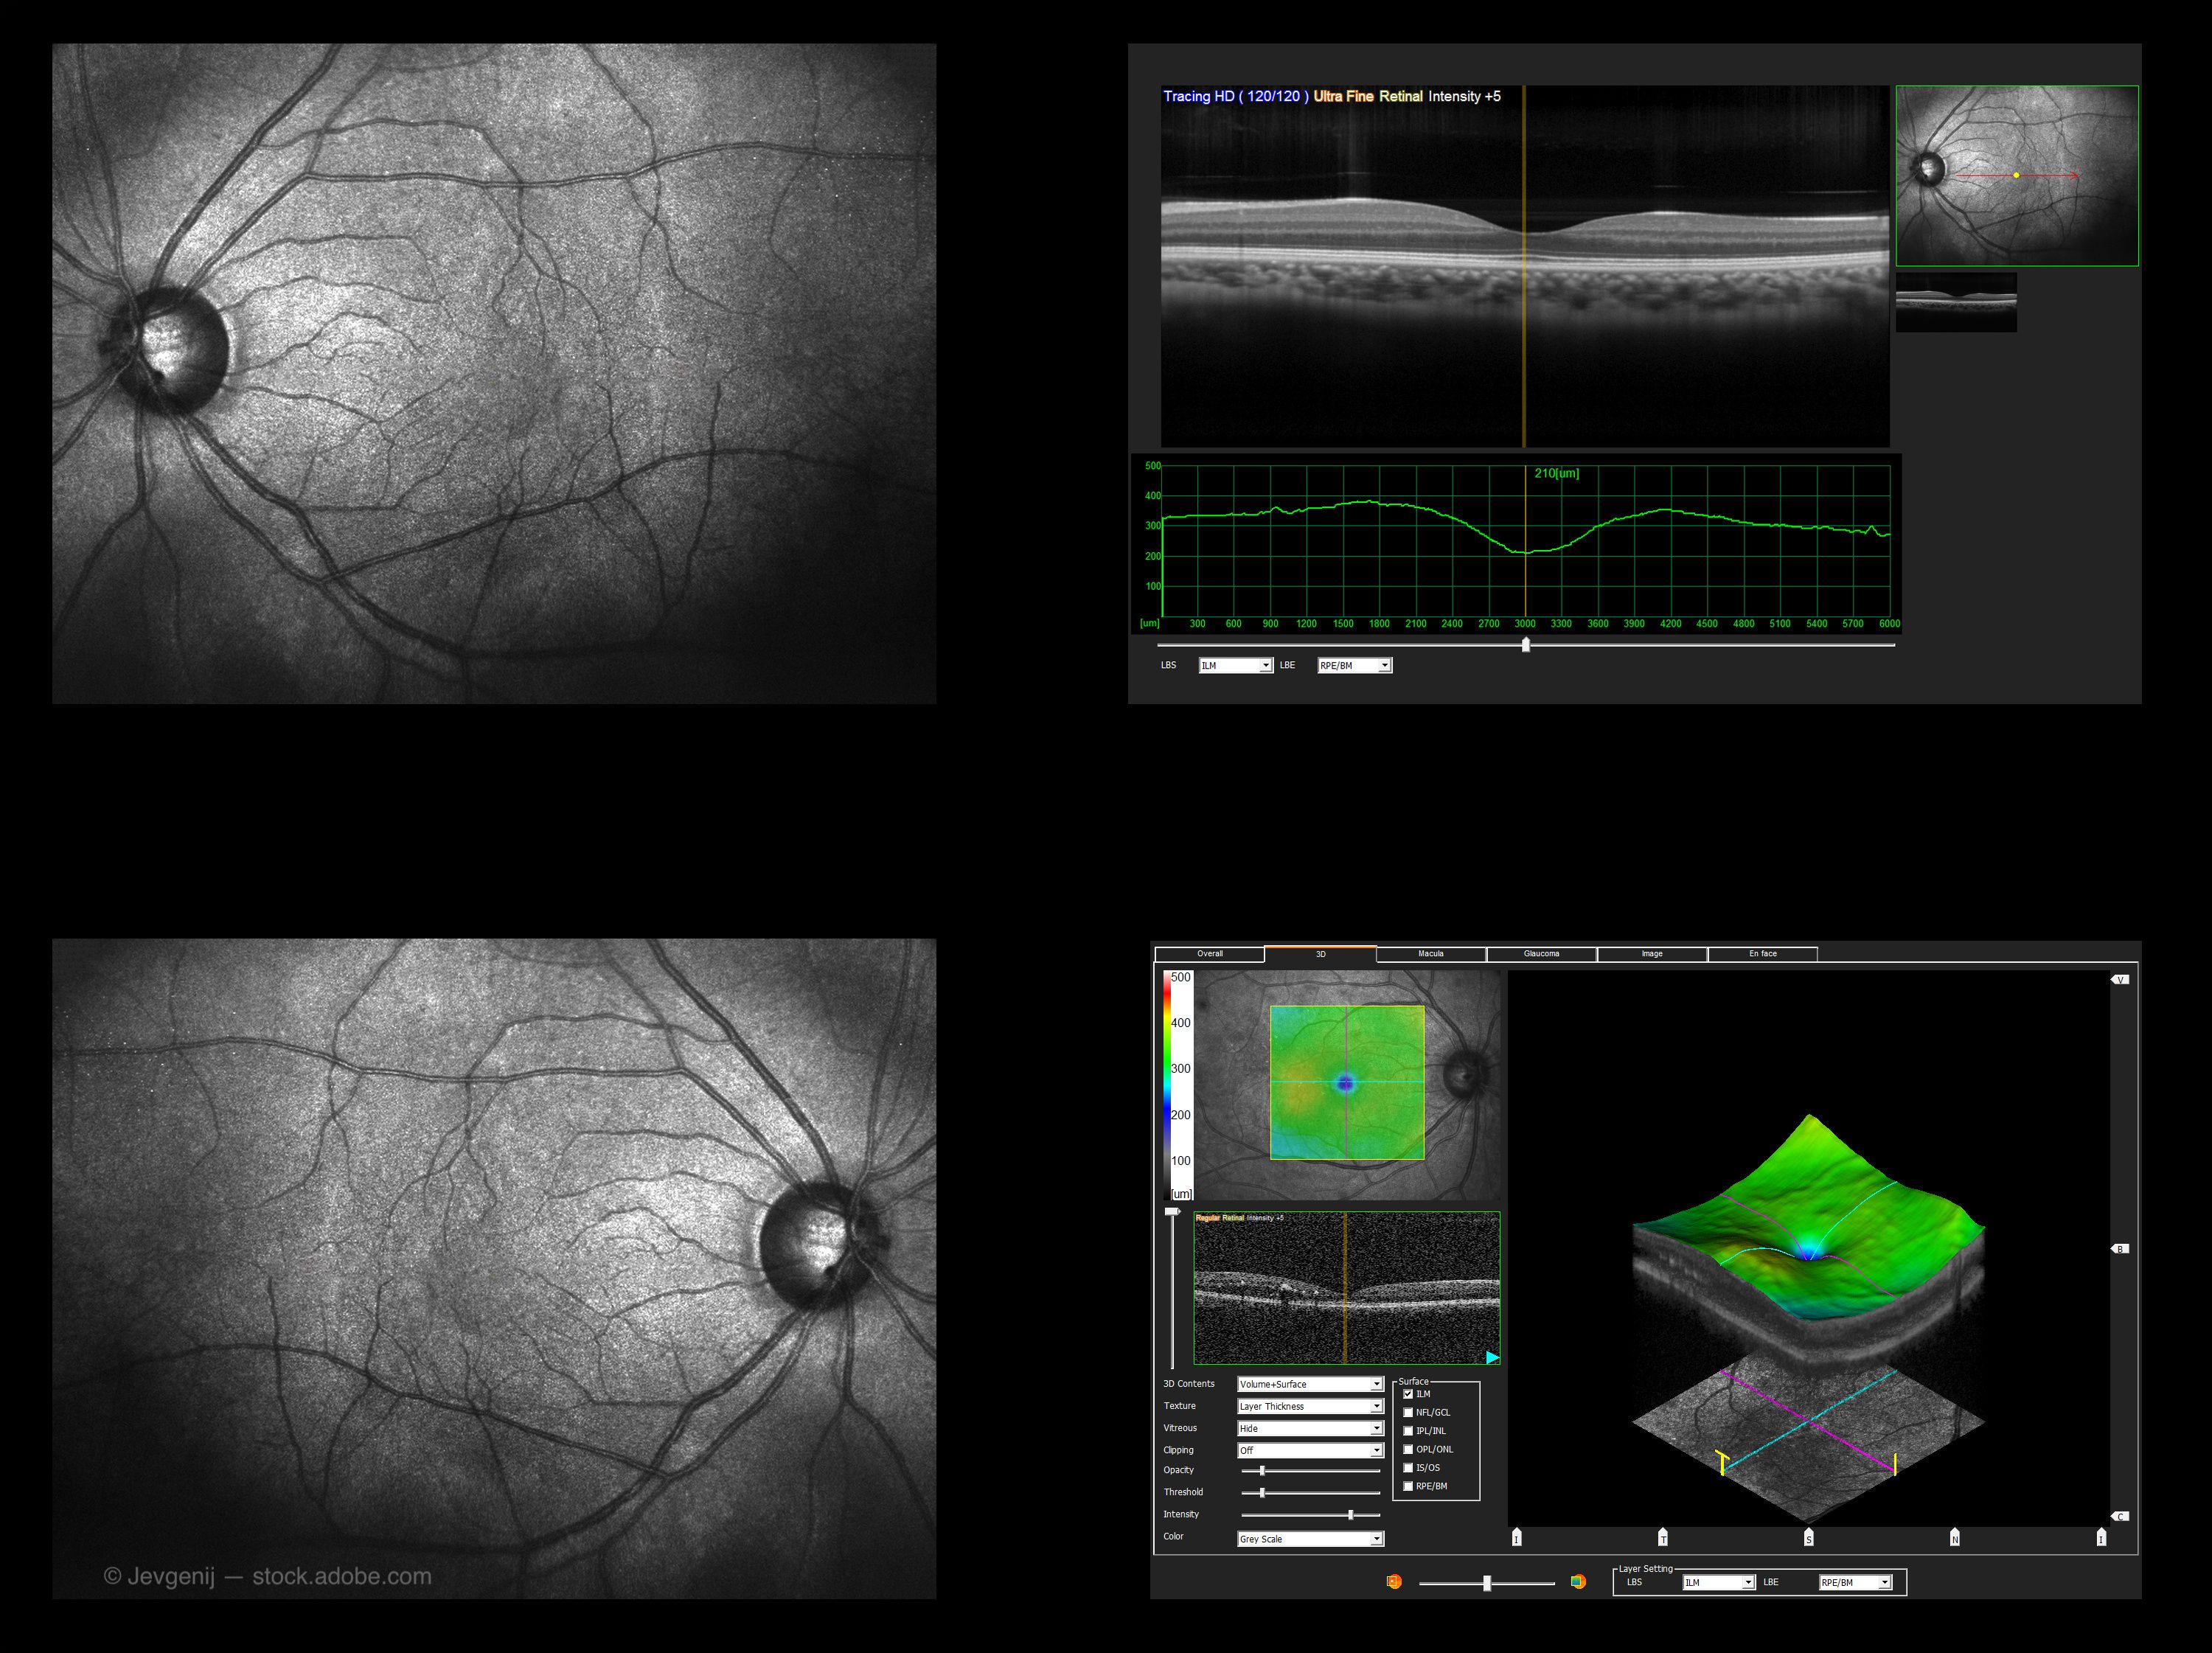 Choroidal hypertransmission defects on en face OCT imaging predict geographic atrophy in patients